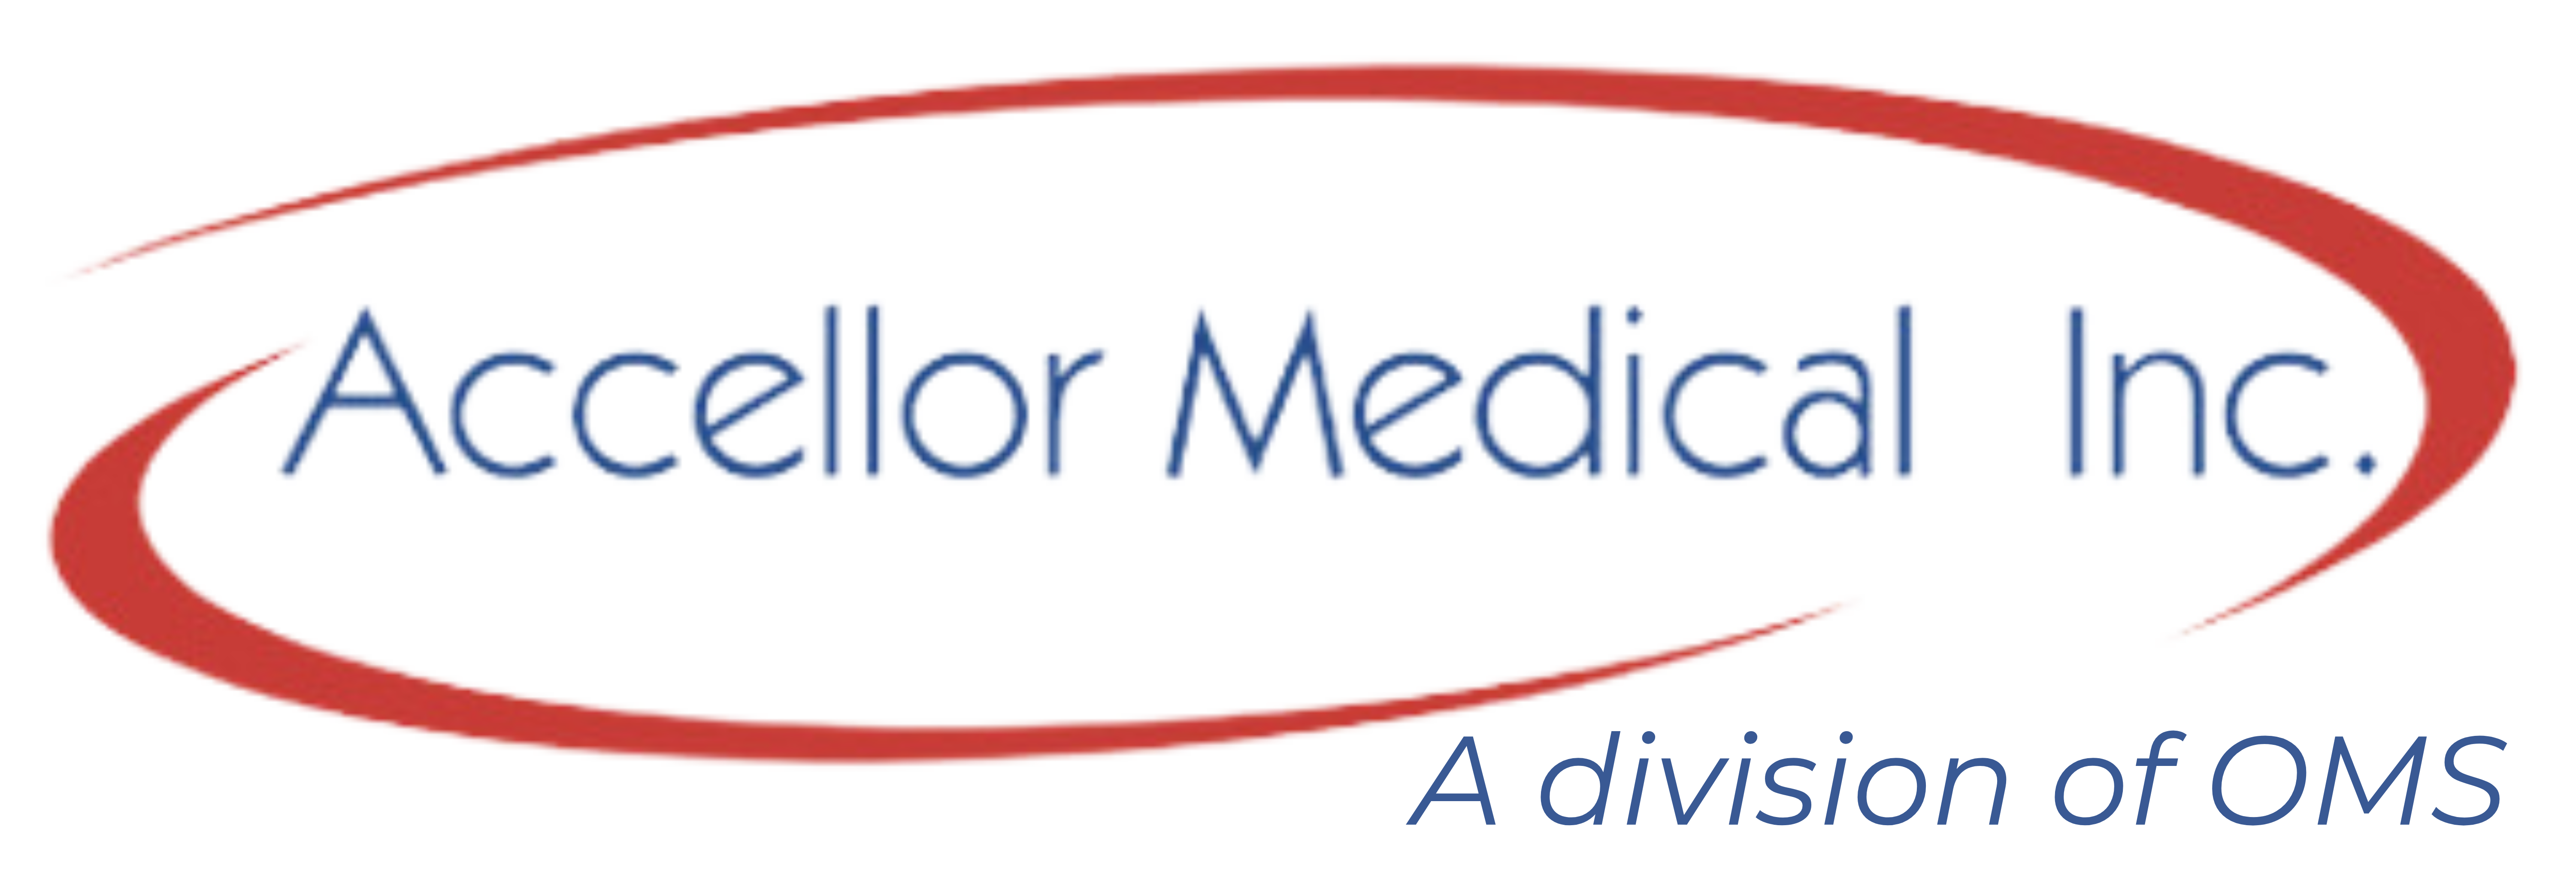 Accellor Medical - a division of OMS 661x1921